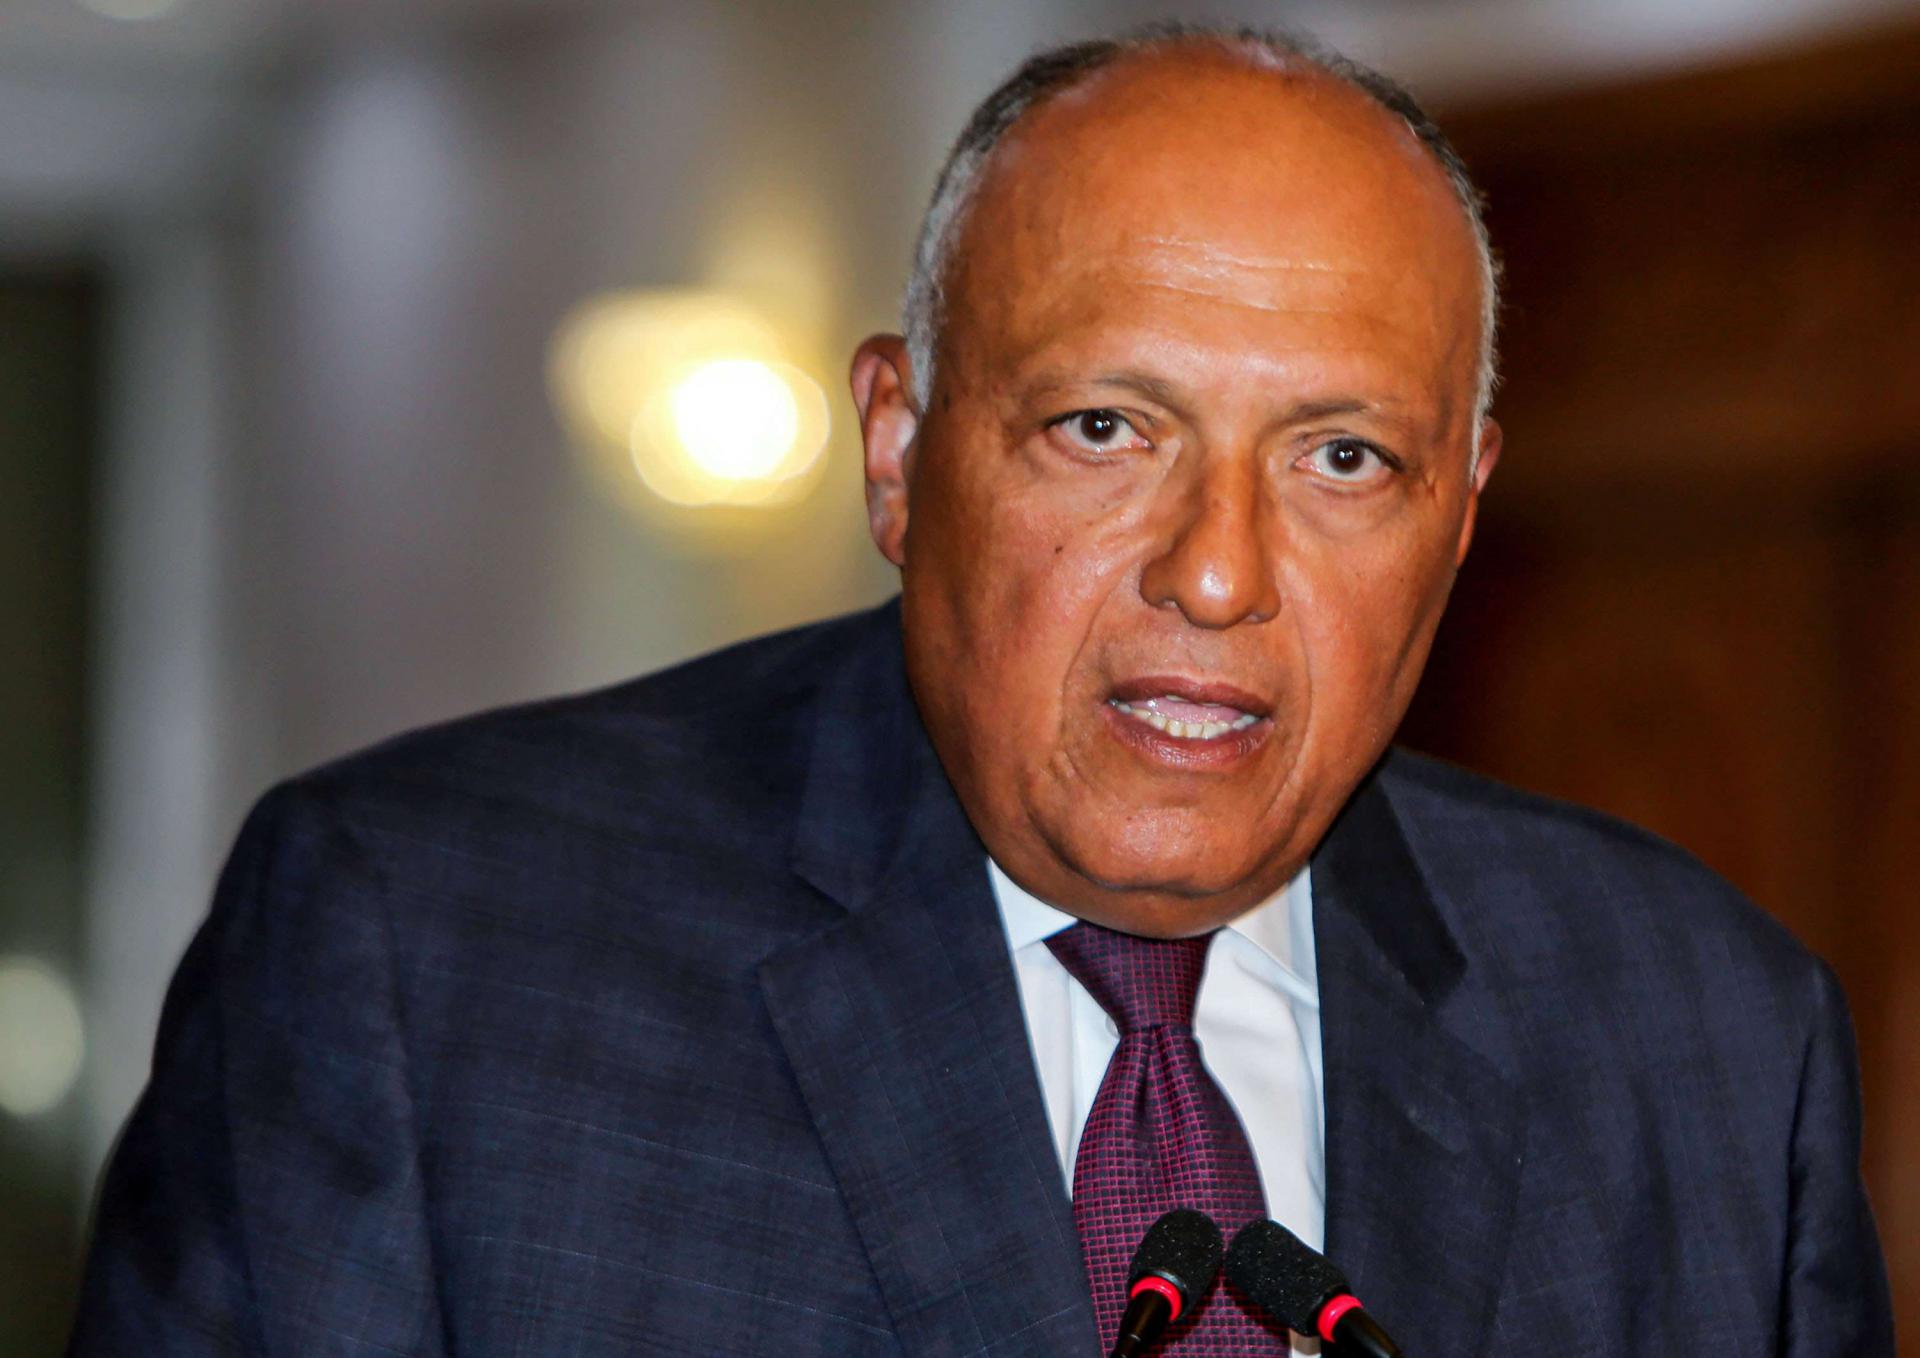 Shoukry was due to hold talks with officials including new Prime Minister Abdalla Hamdok and Sudan's first female foreign affairs minister